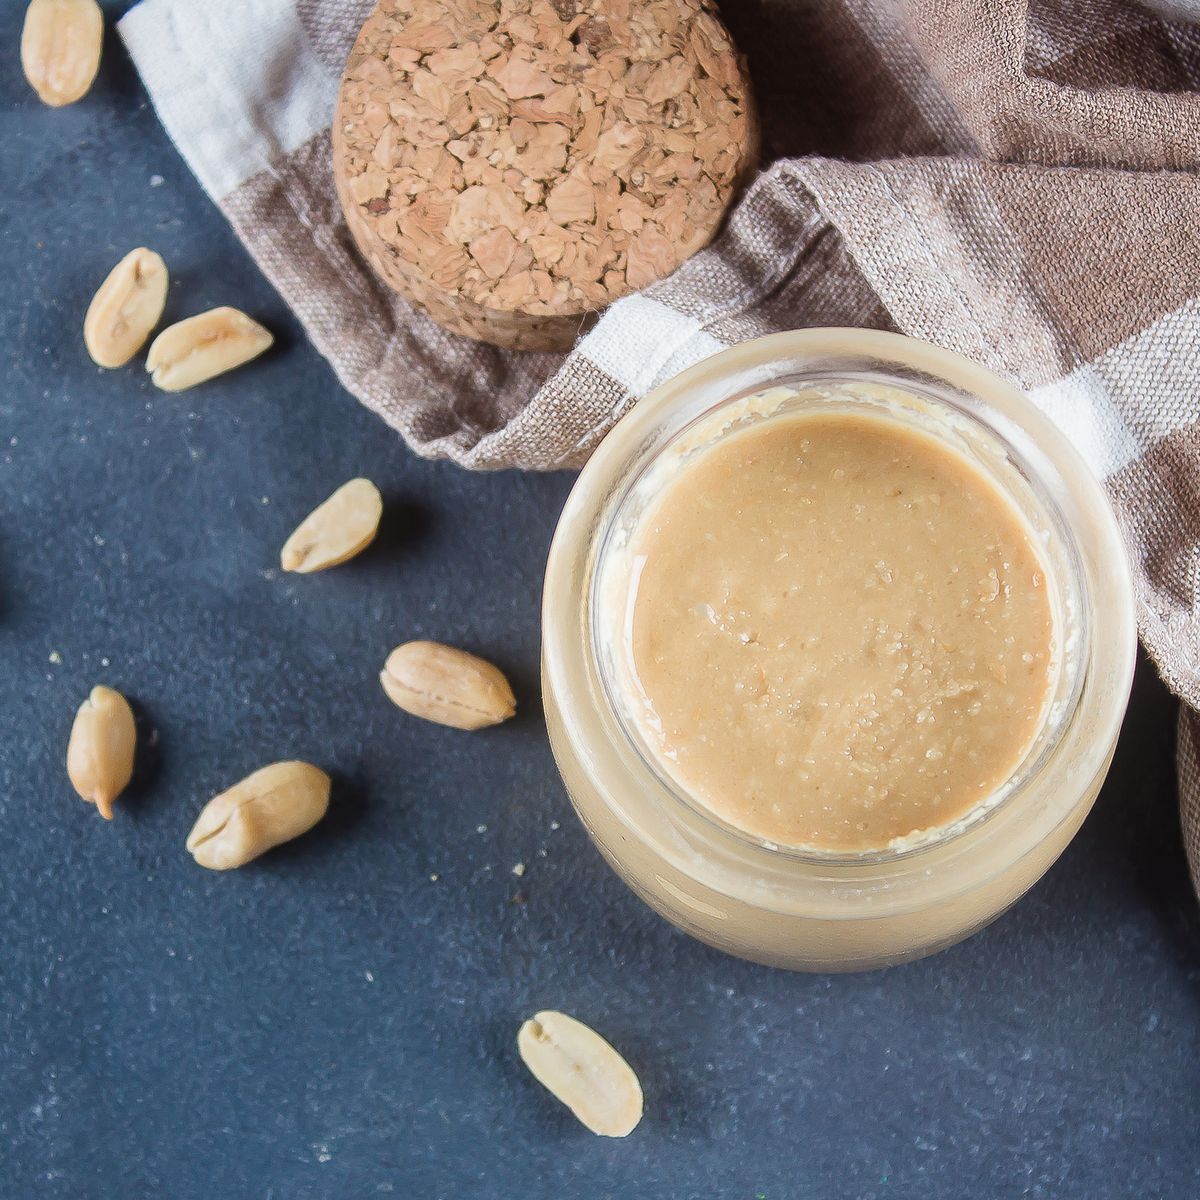 Homemade Peanut butter in glass jar and peanuts on blue concrete table background. Top view